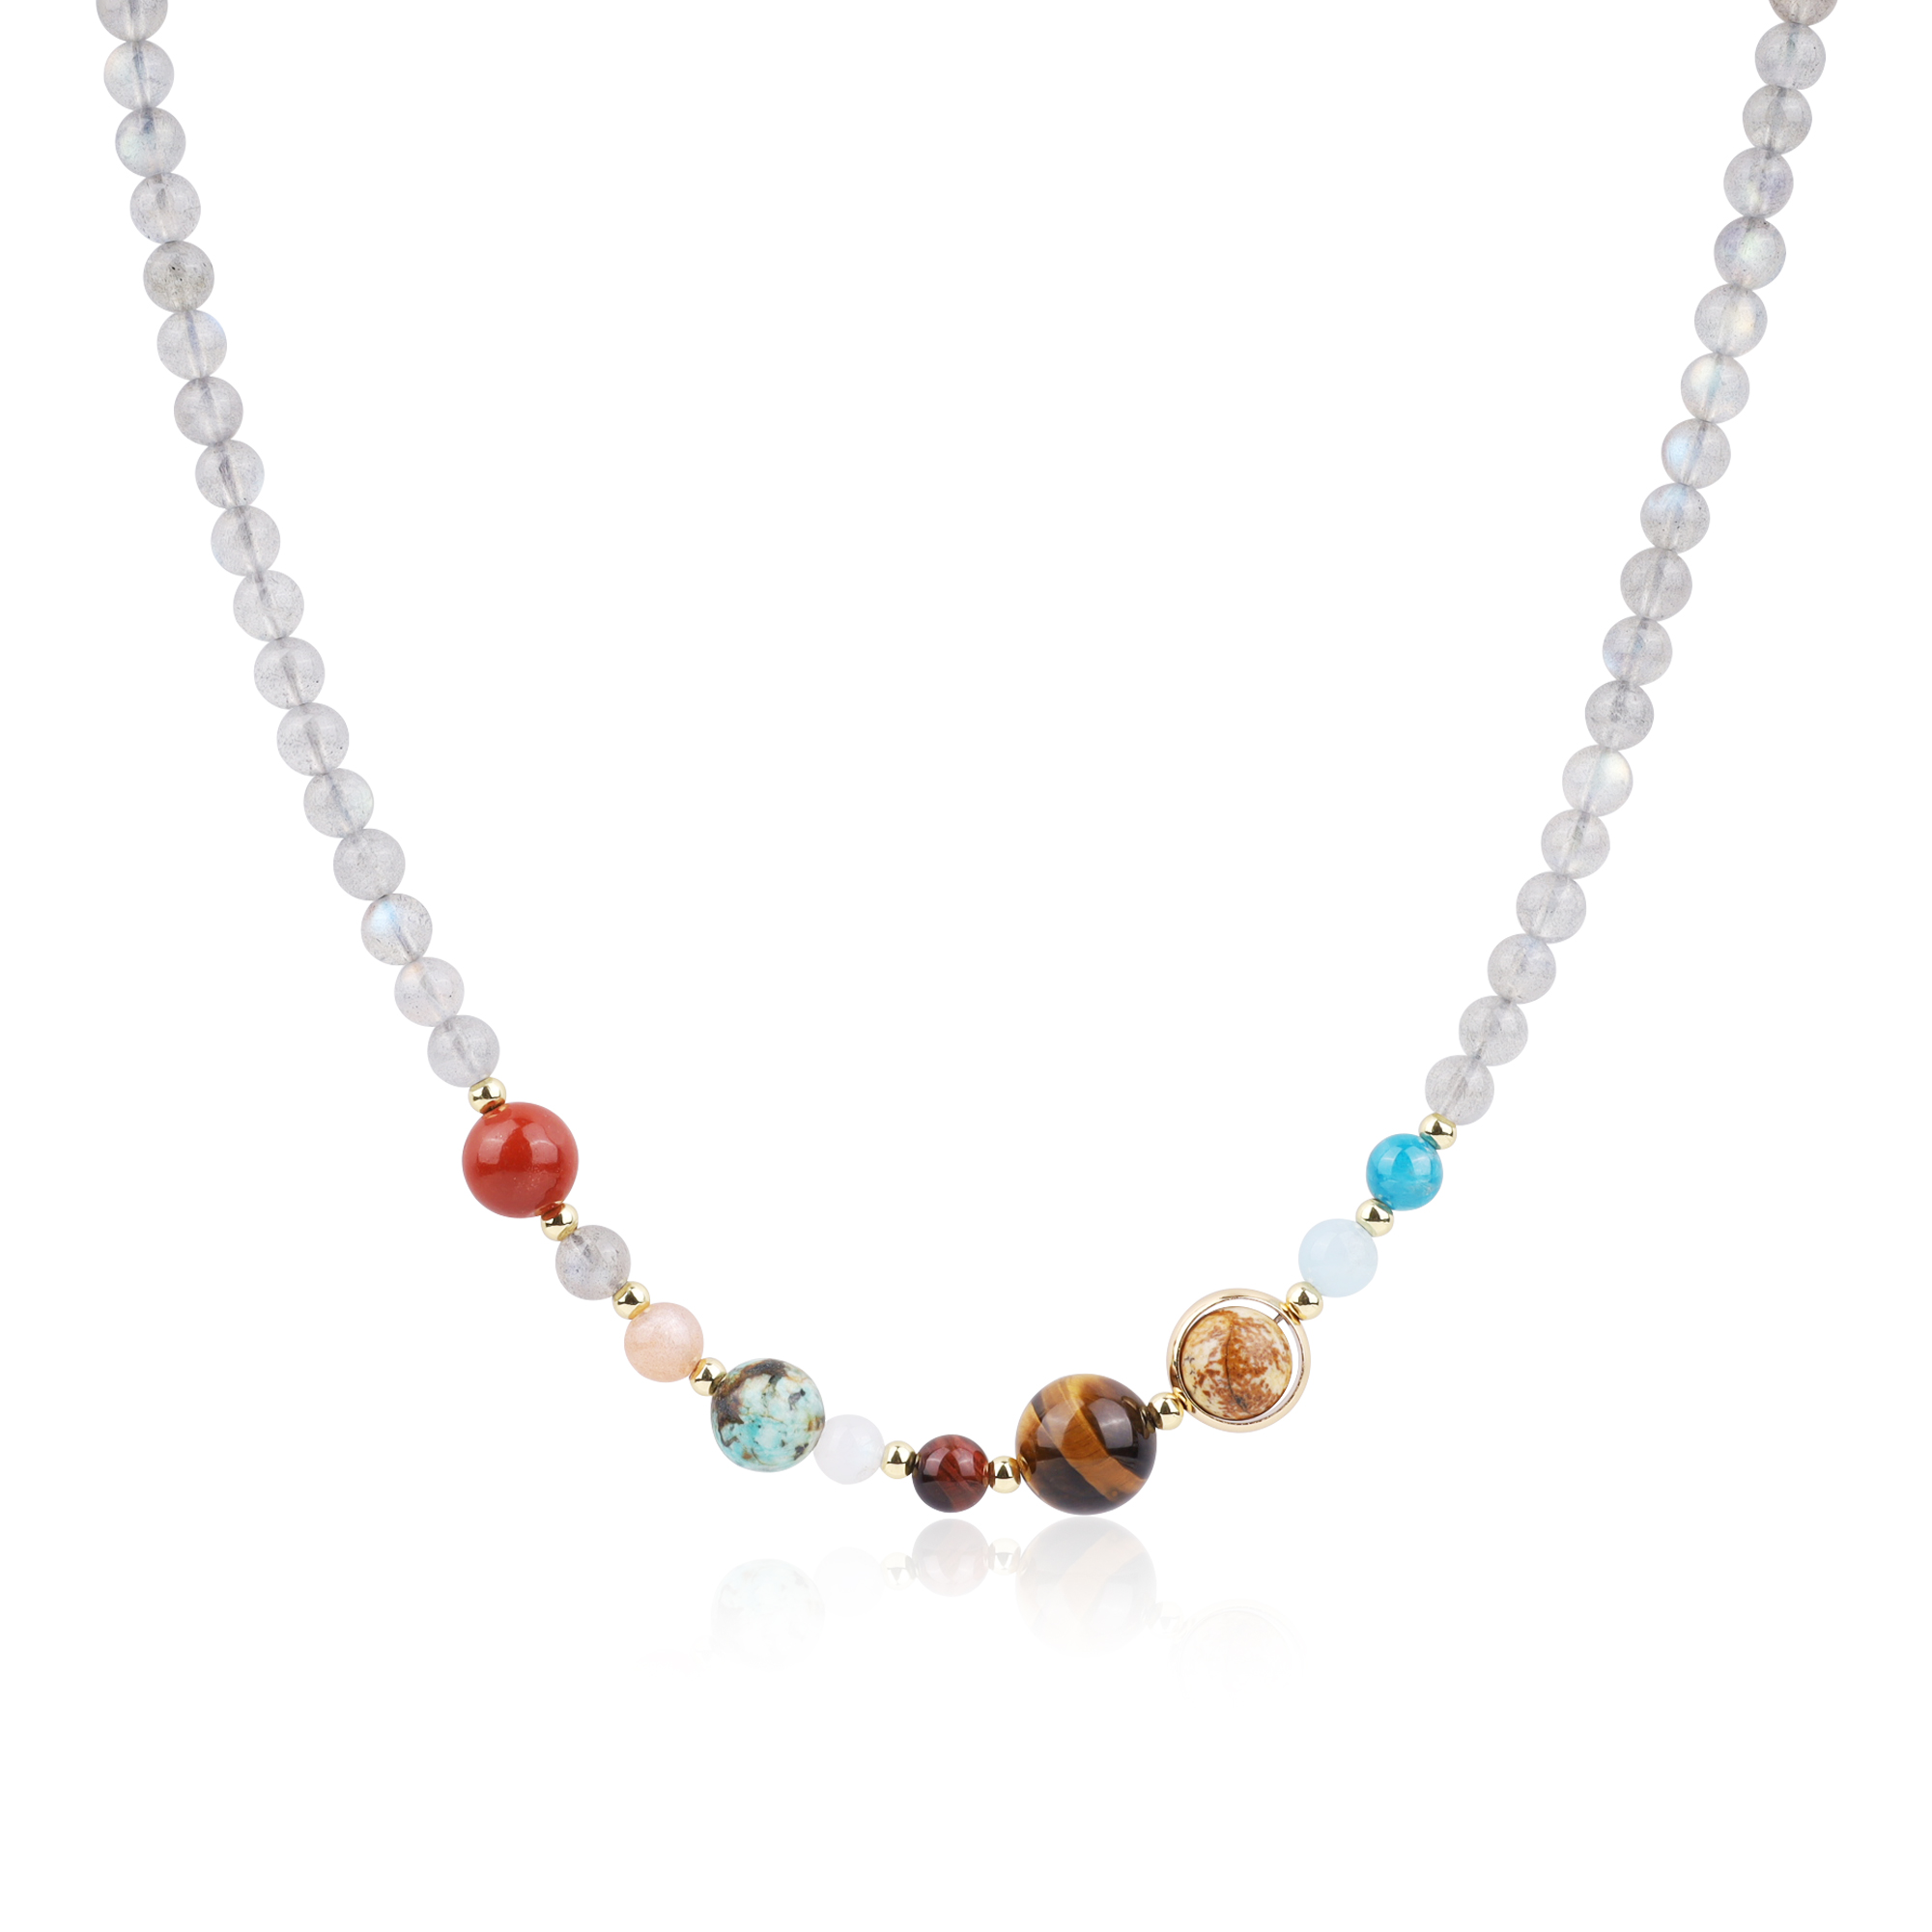 3D Planet Earth Solar System Necklace – The Wistful Woods